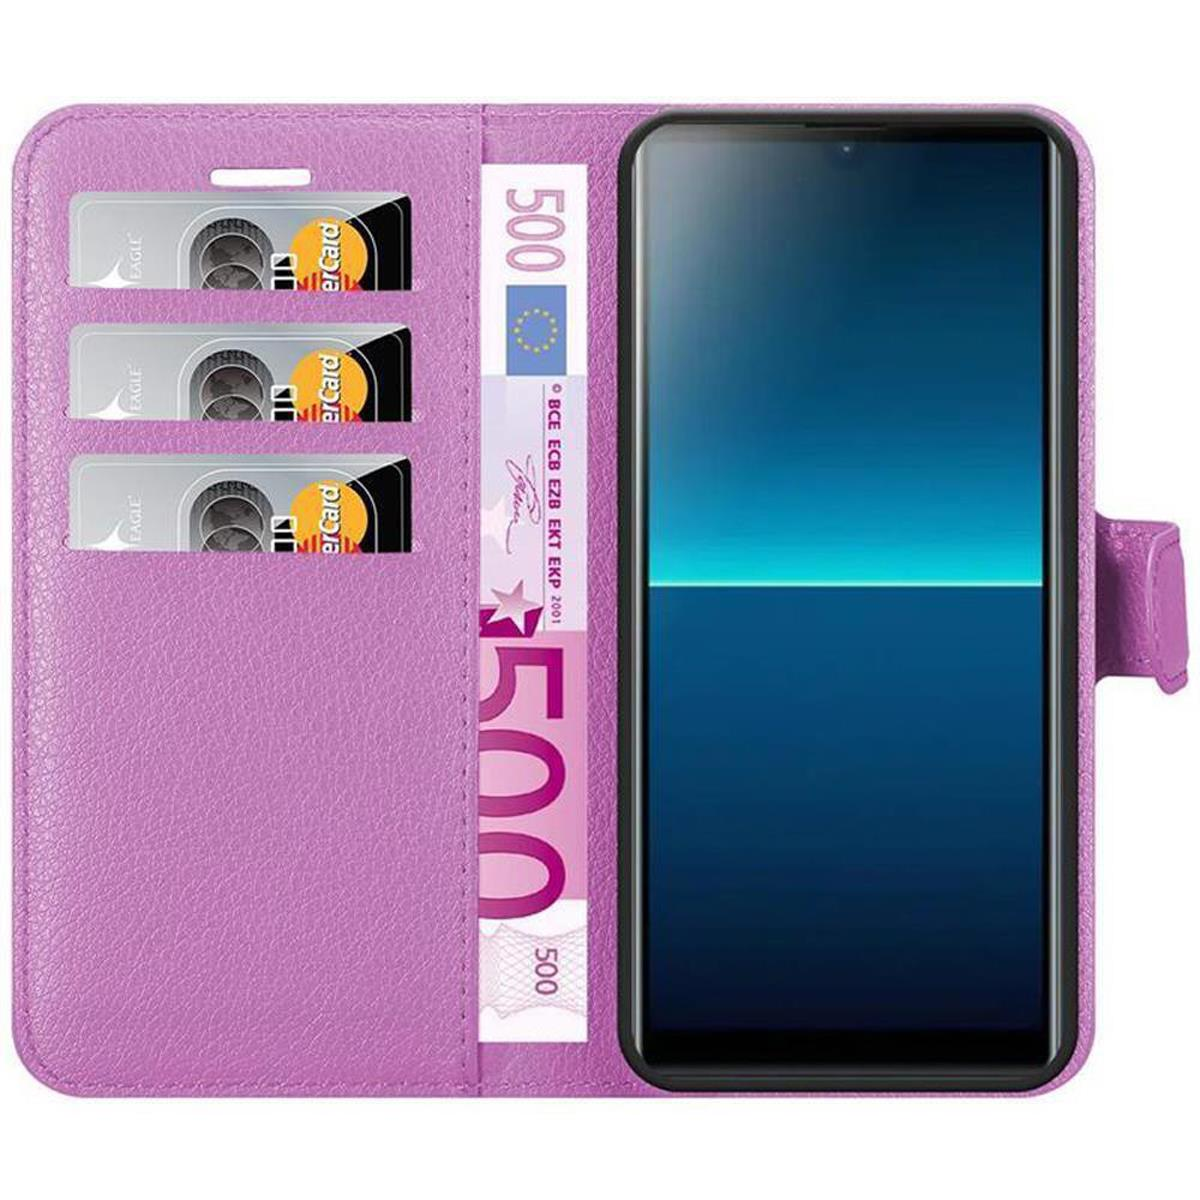 Bookcover, L4, Xperia Standfunktion, Hülle Book MANGAN VIOLETT Sony, CADORABO